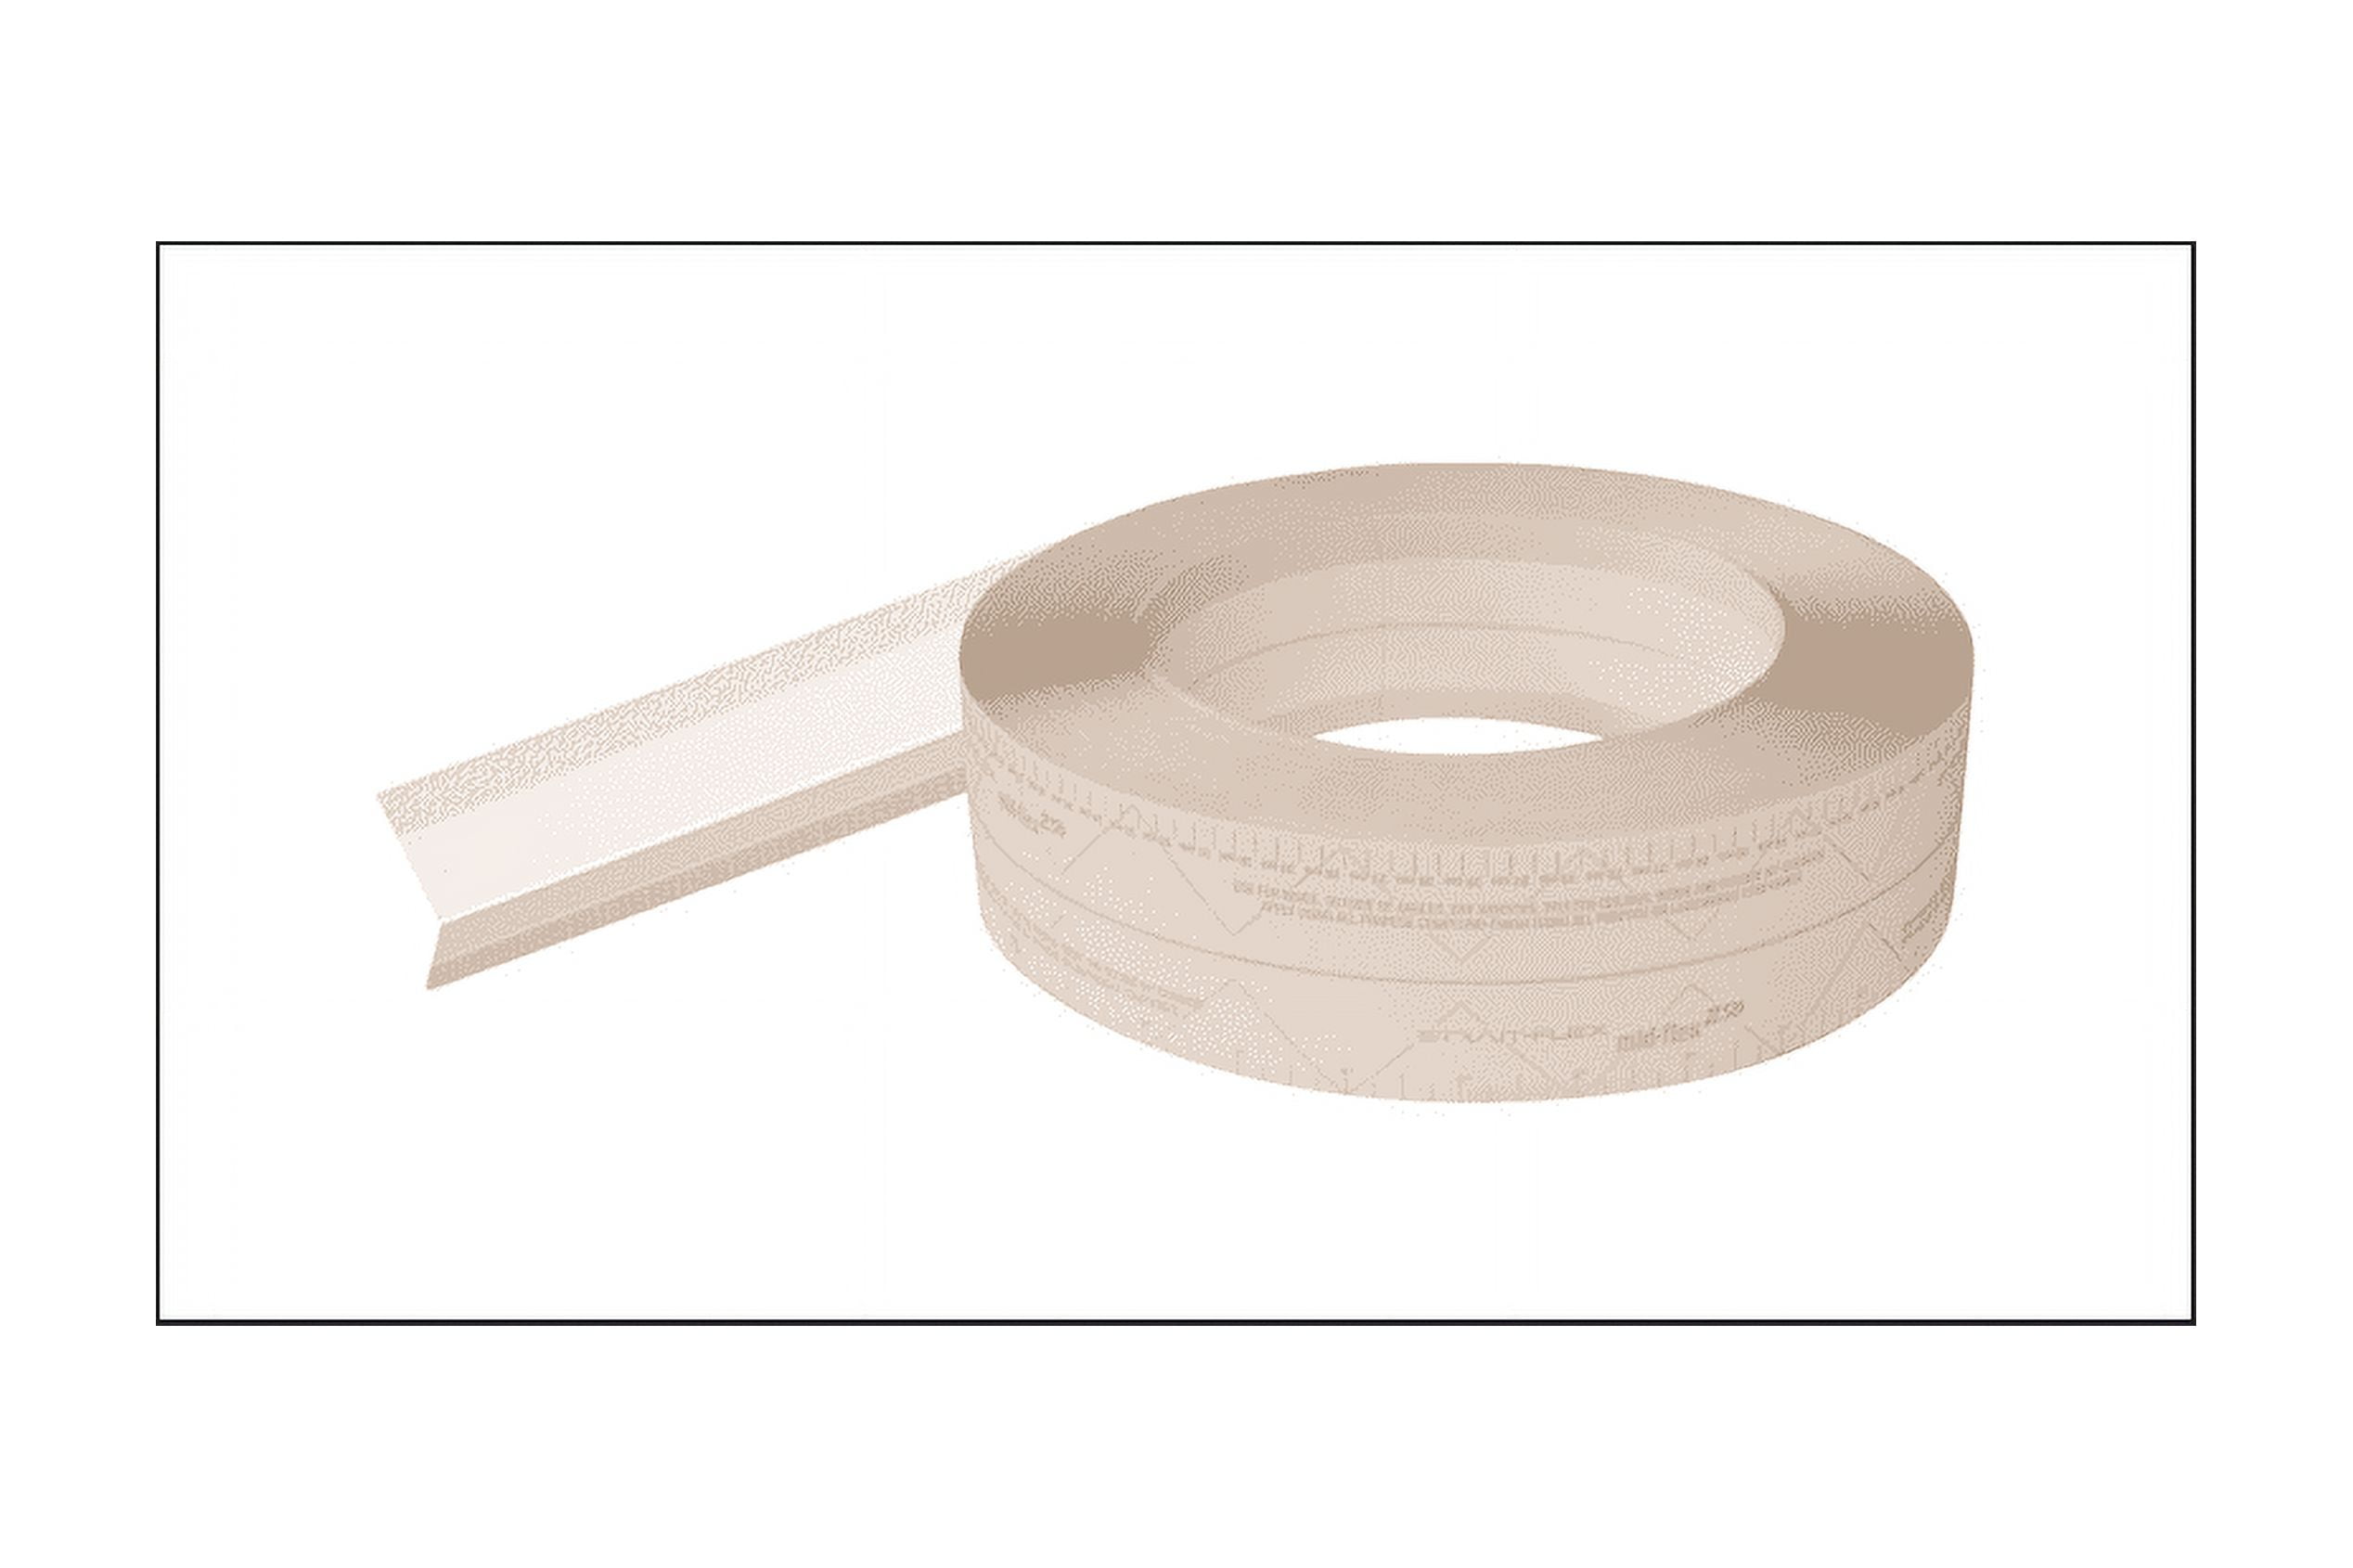 Nitto (Permacel) P-02 Double-Sided Kraft Paper Tape